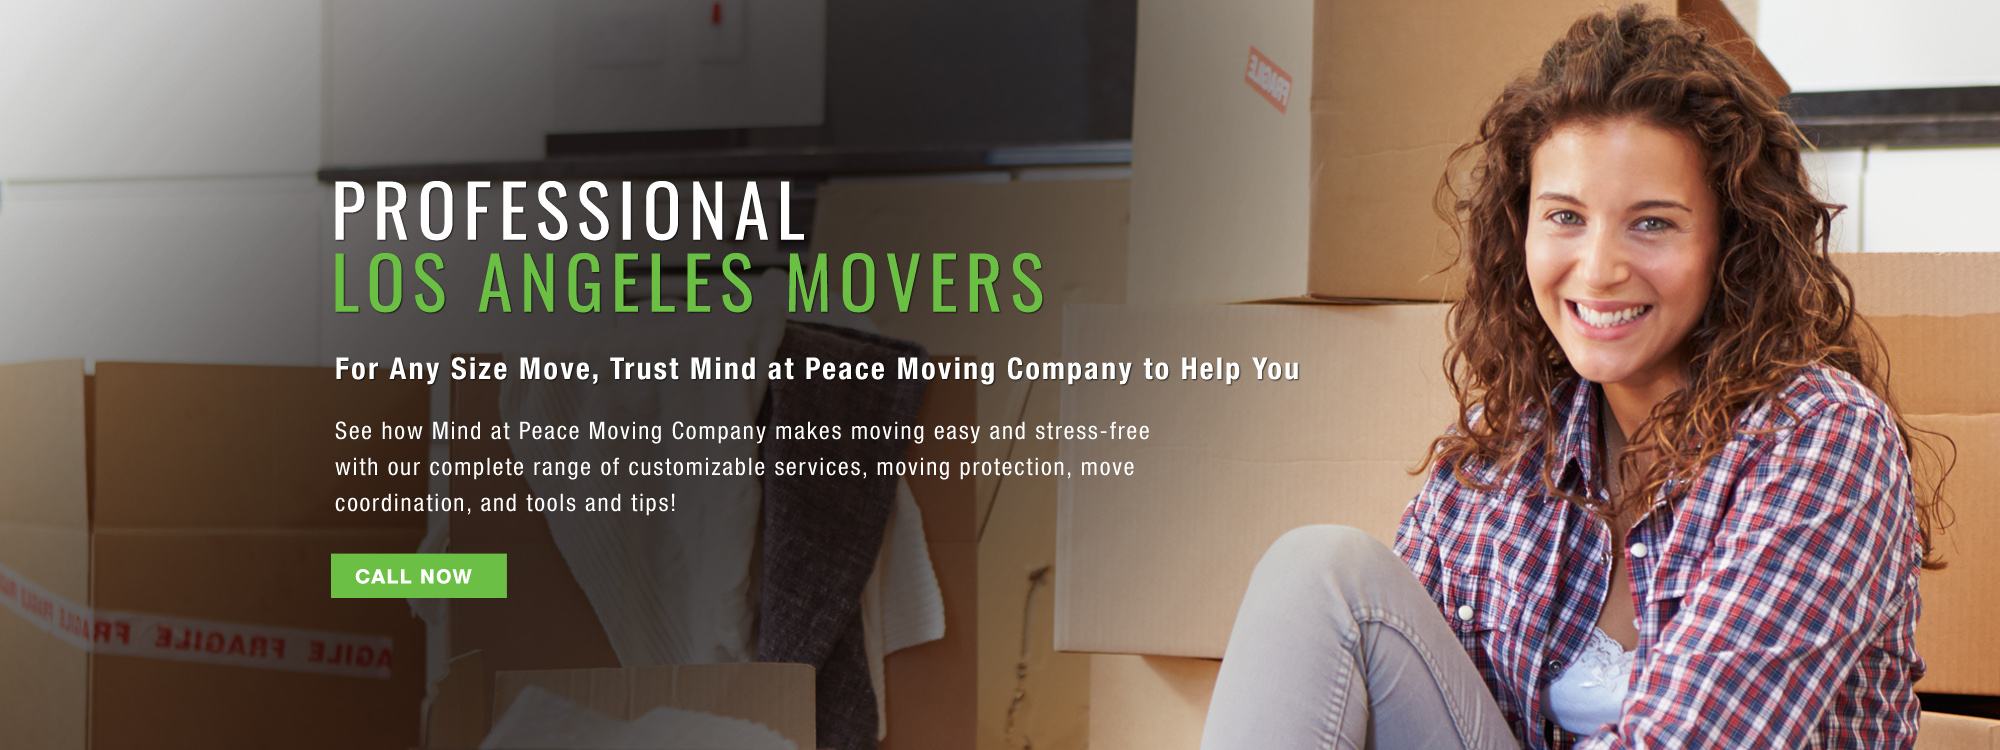 7 Best Moving Companies (2022) - This Old House